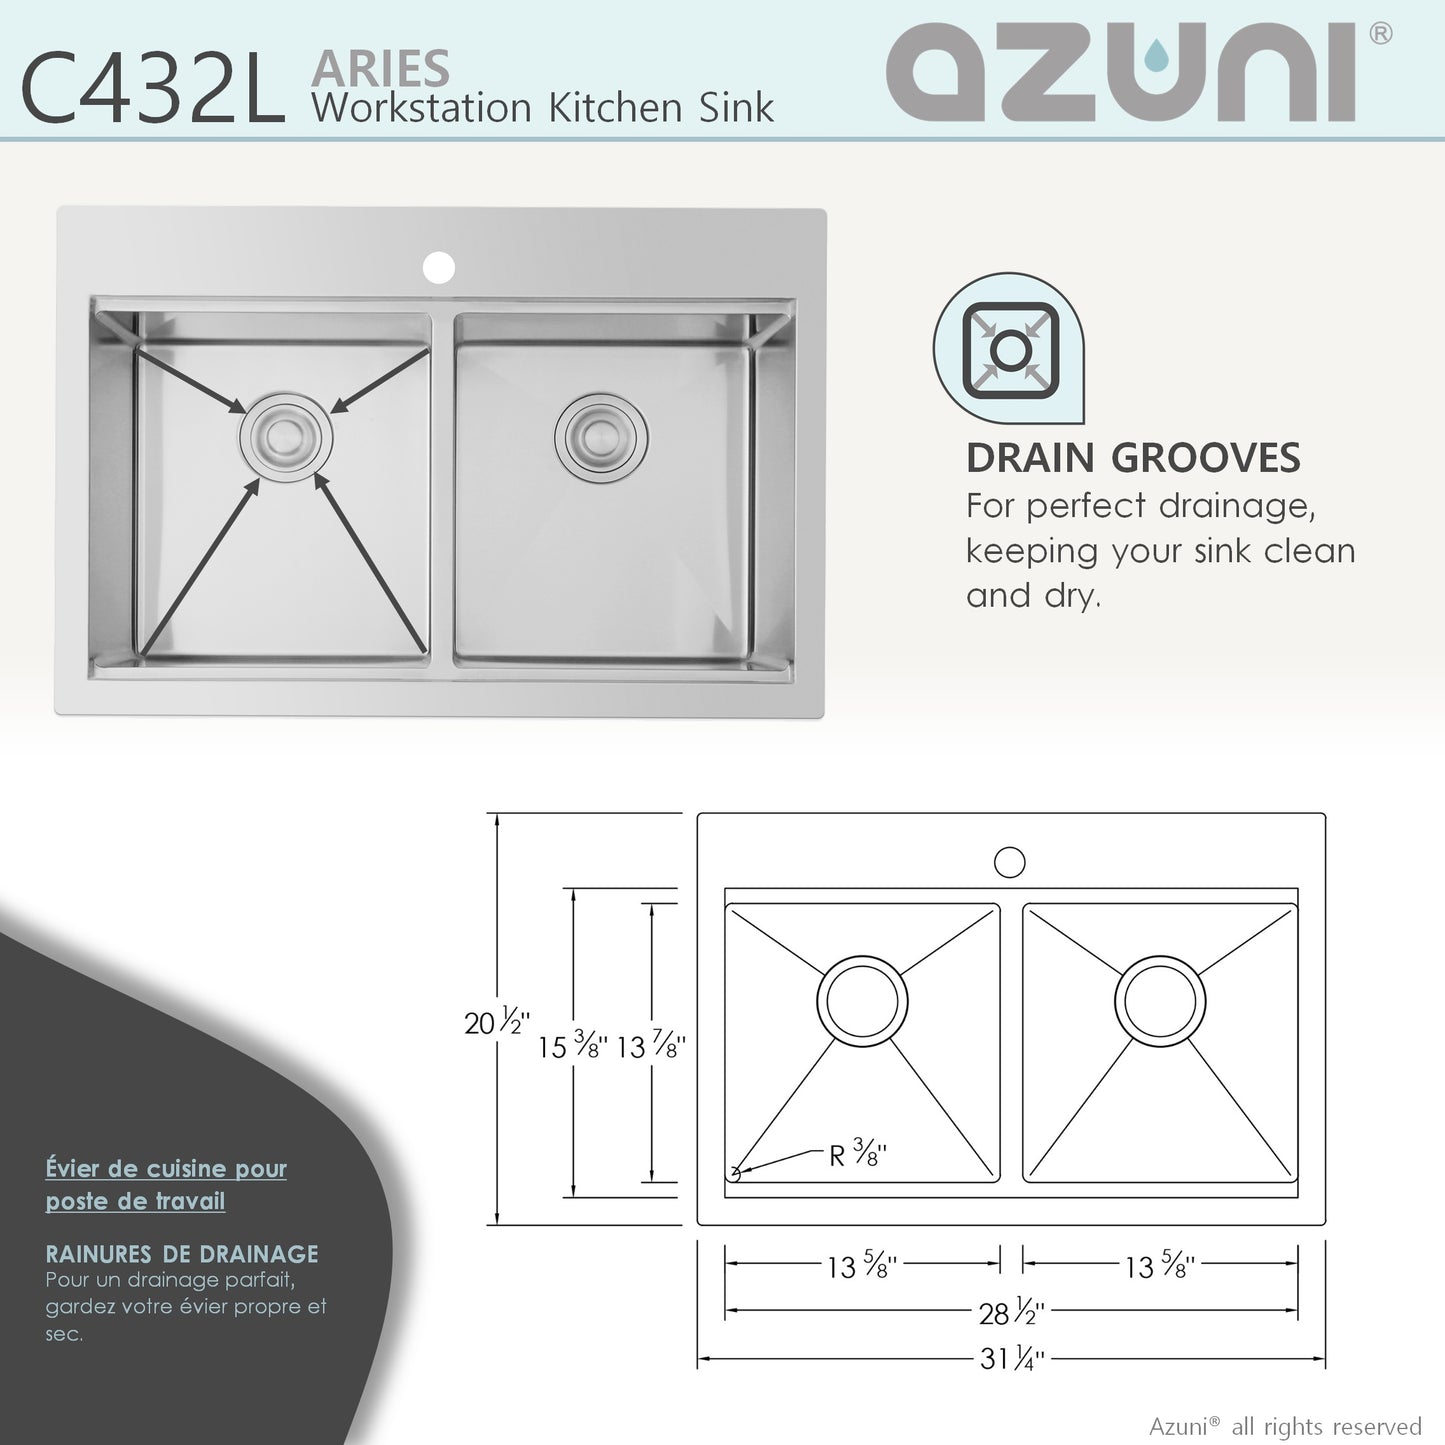 AZUNI 30"L x 20.5"W Aries Top mounted Double Bowl Stainless Steel Ledge Workstation Kitchen Sink accessories included